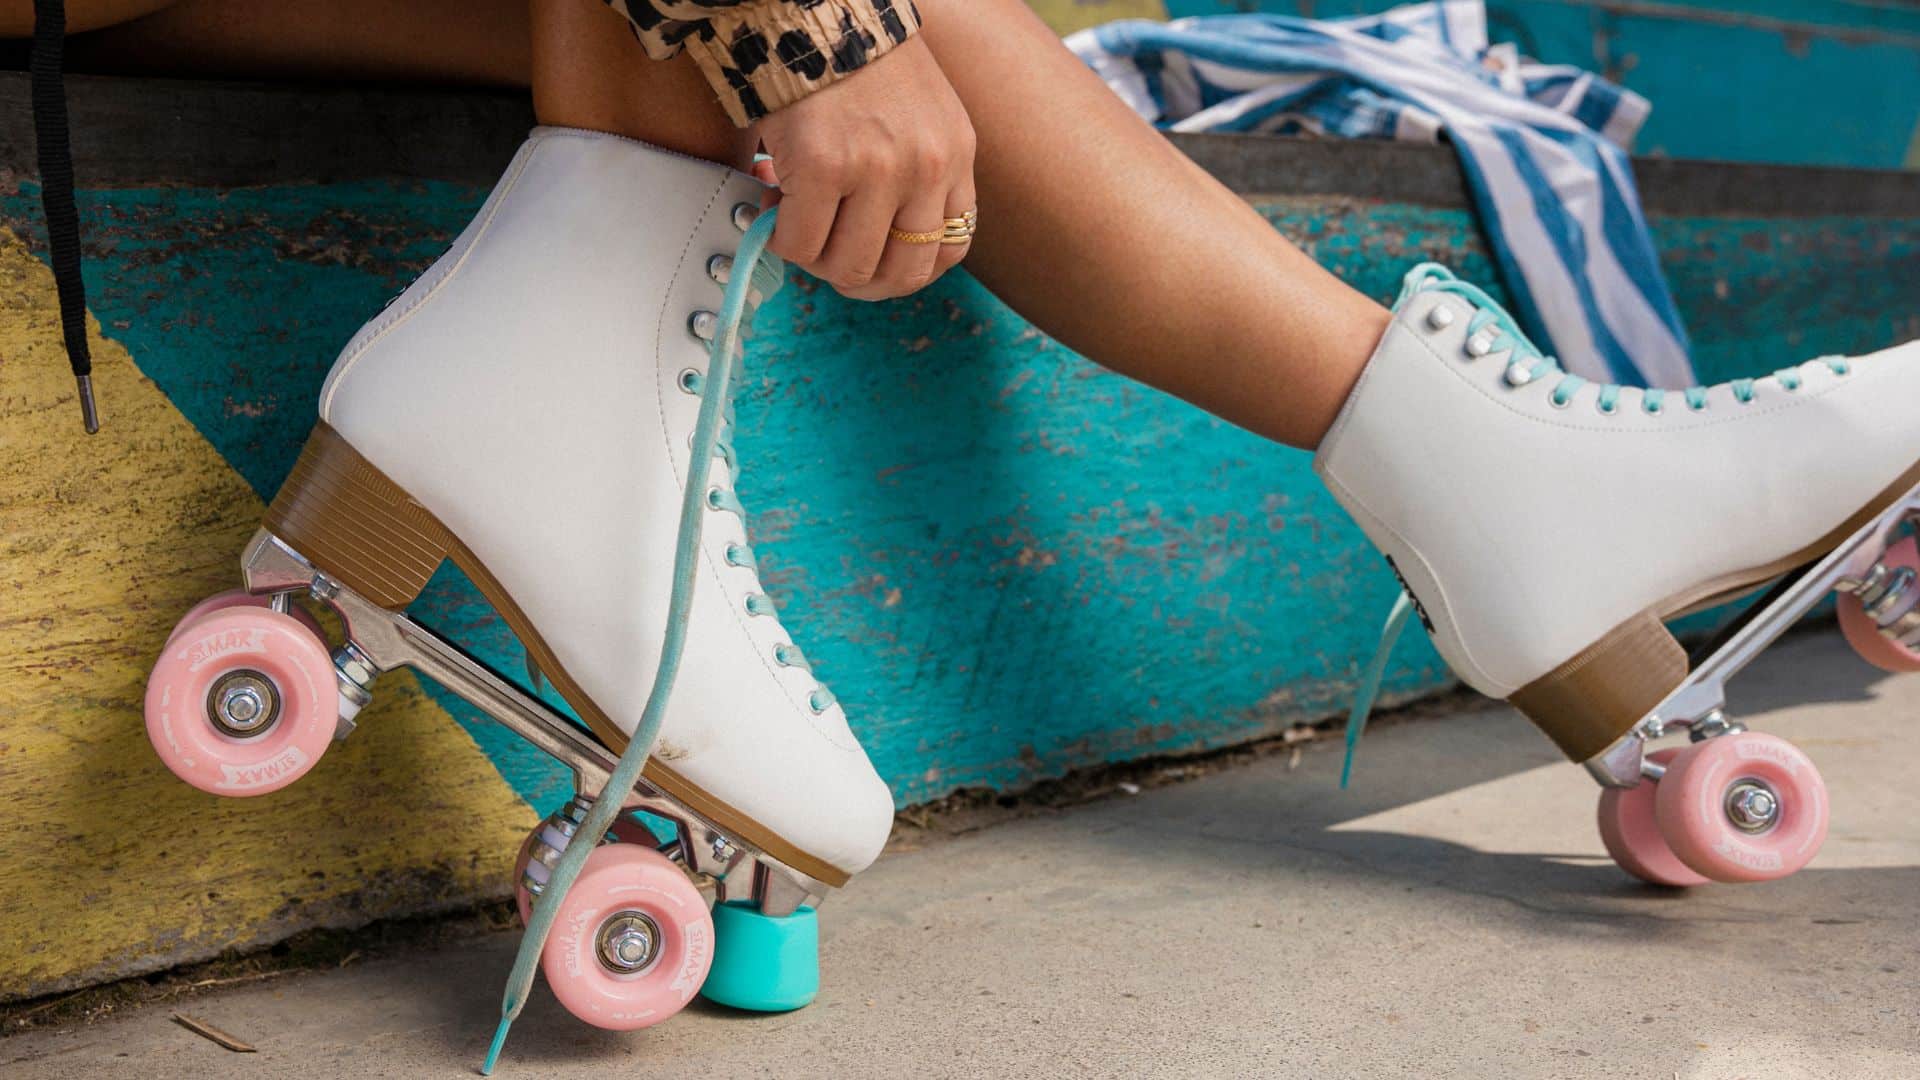 A woman putting on roller skates